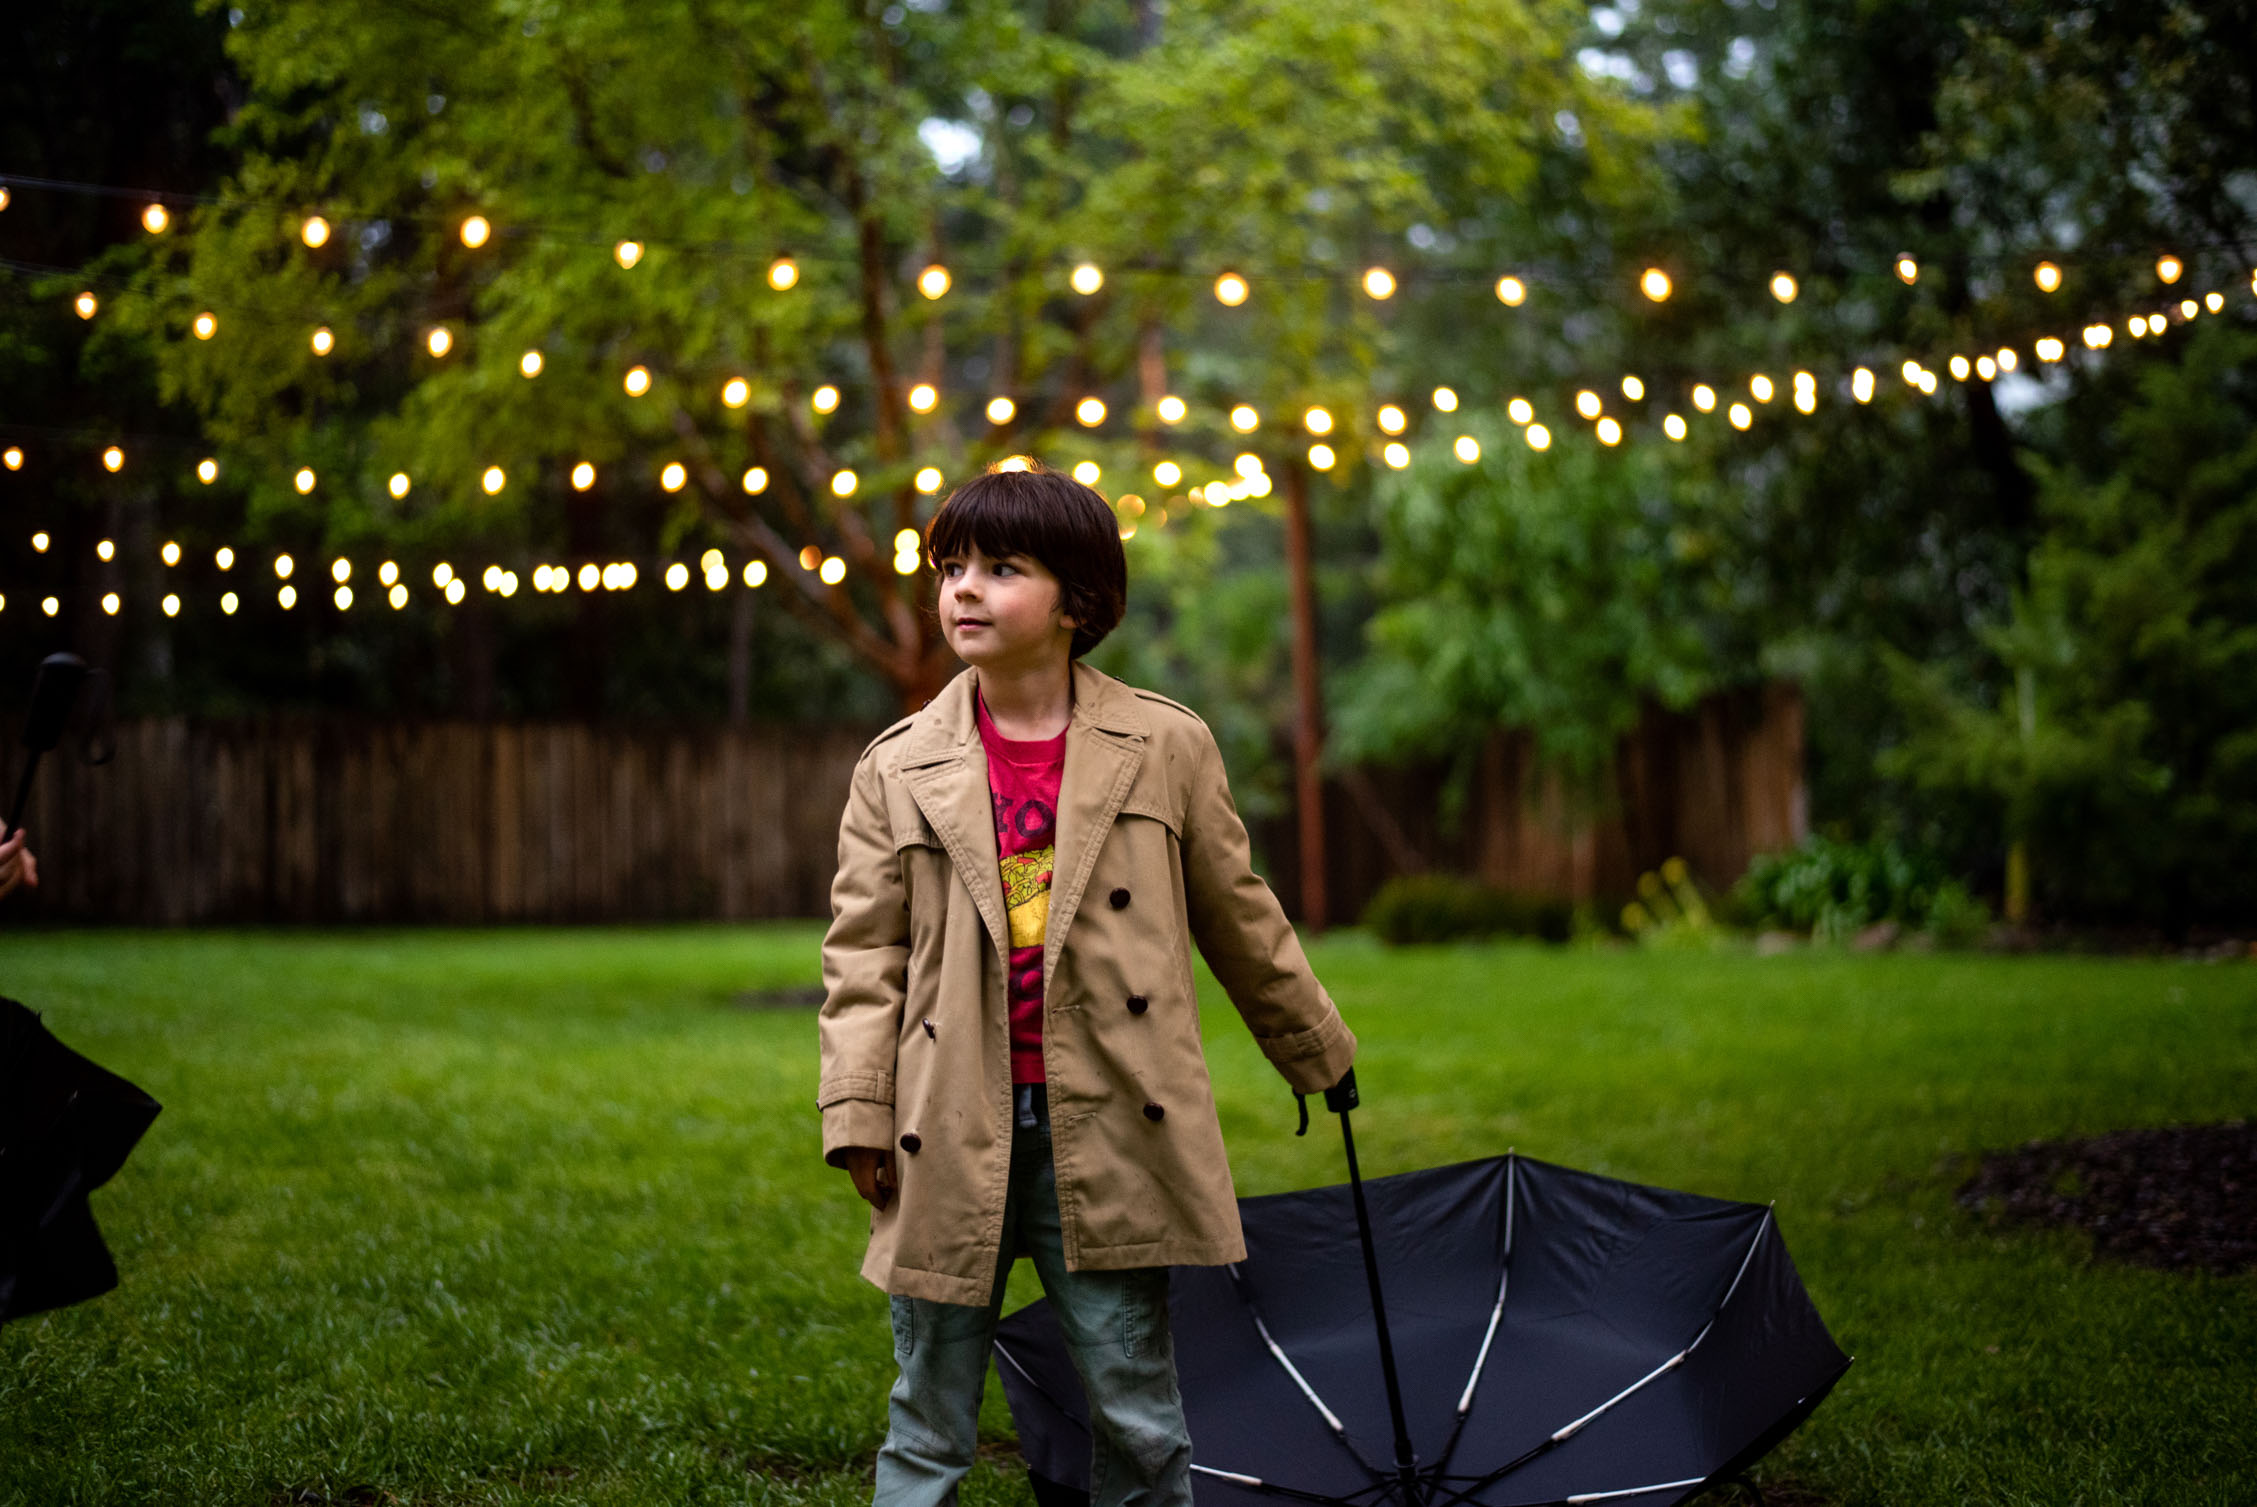 Young boy with umbrella standing under the string lights